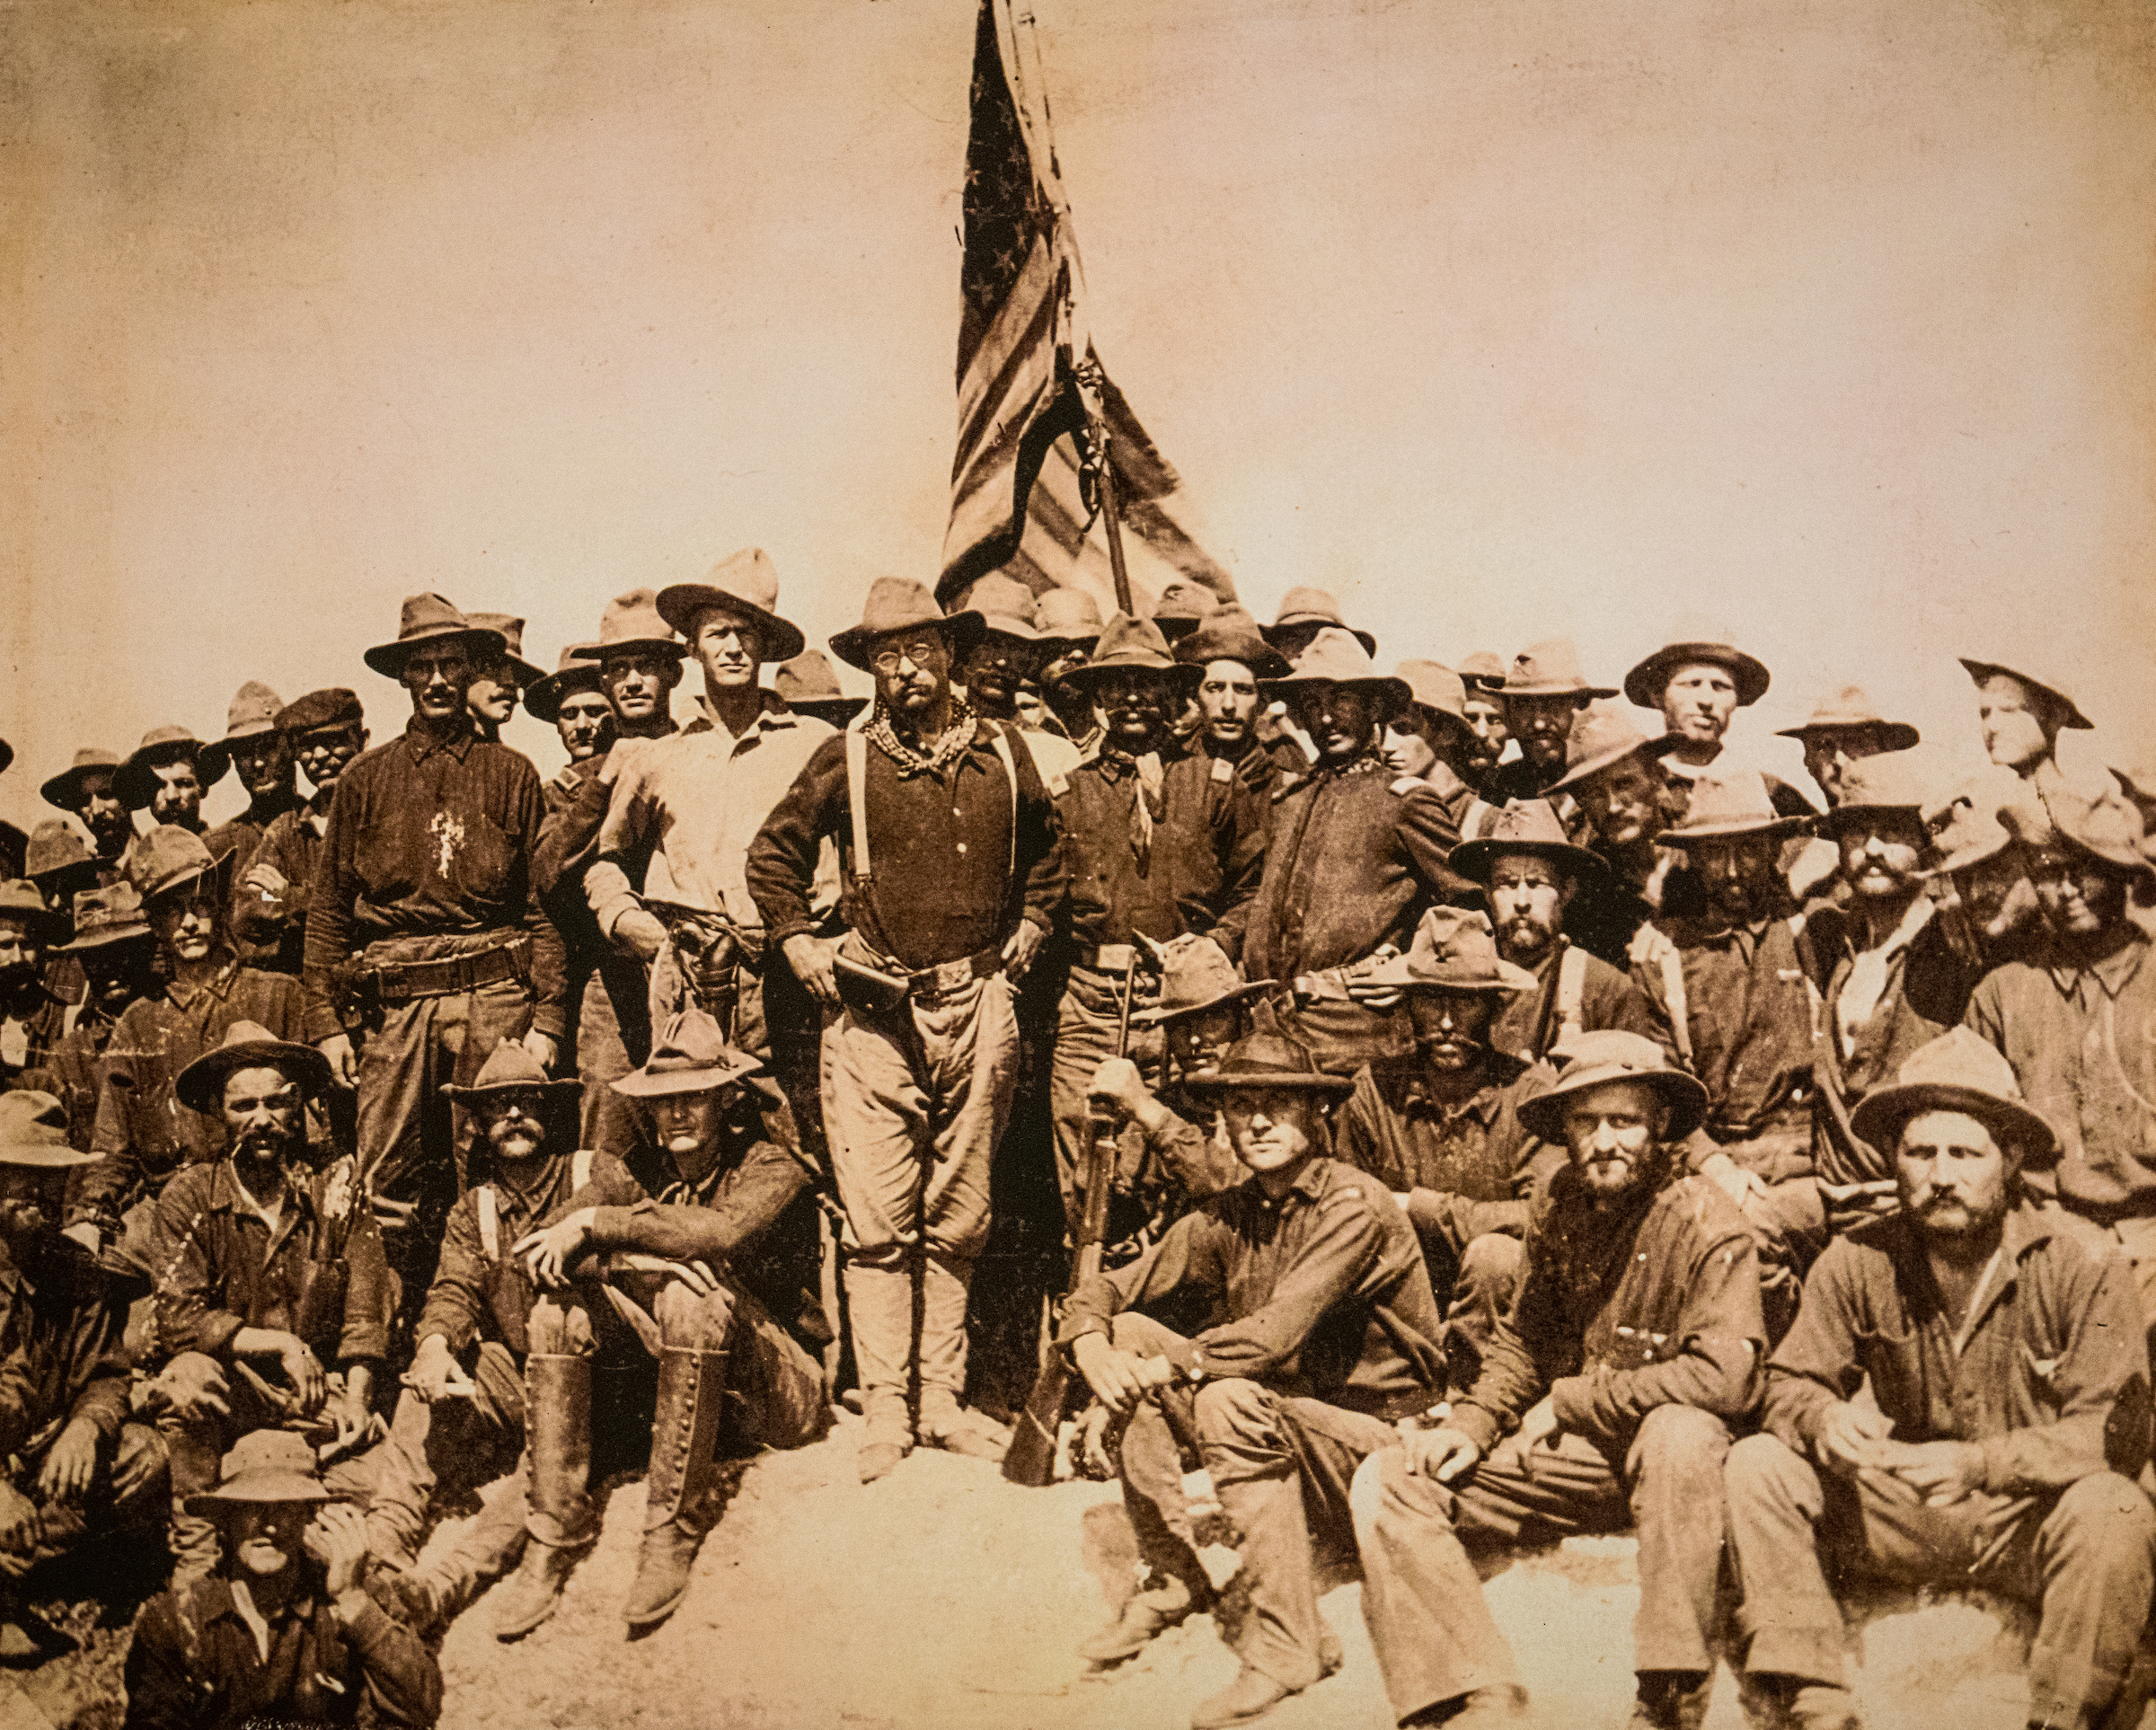 Theodore Roosevelt and the Rough Riders atop San Juan Hill, July 1, 1898